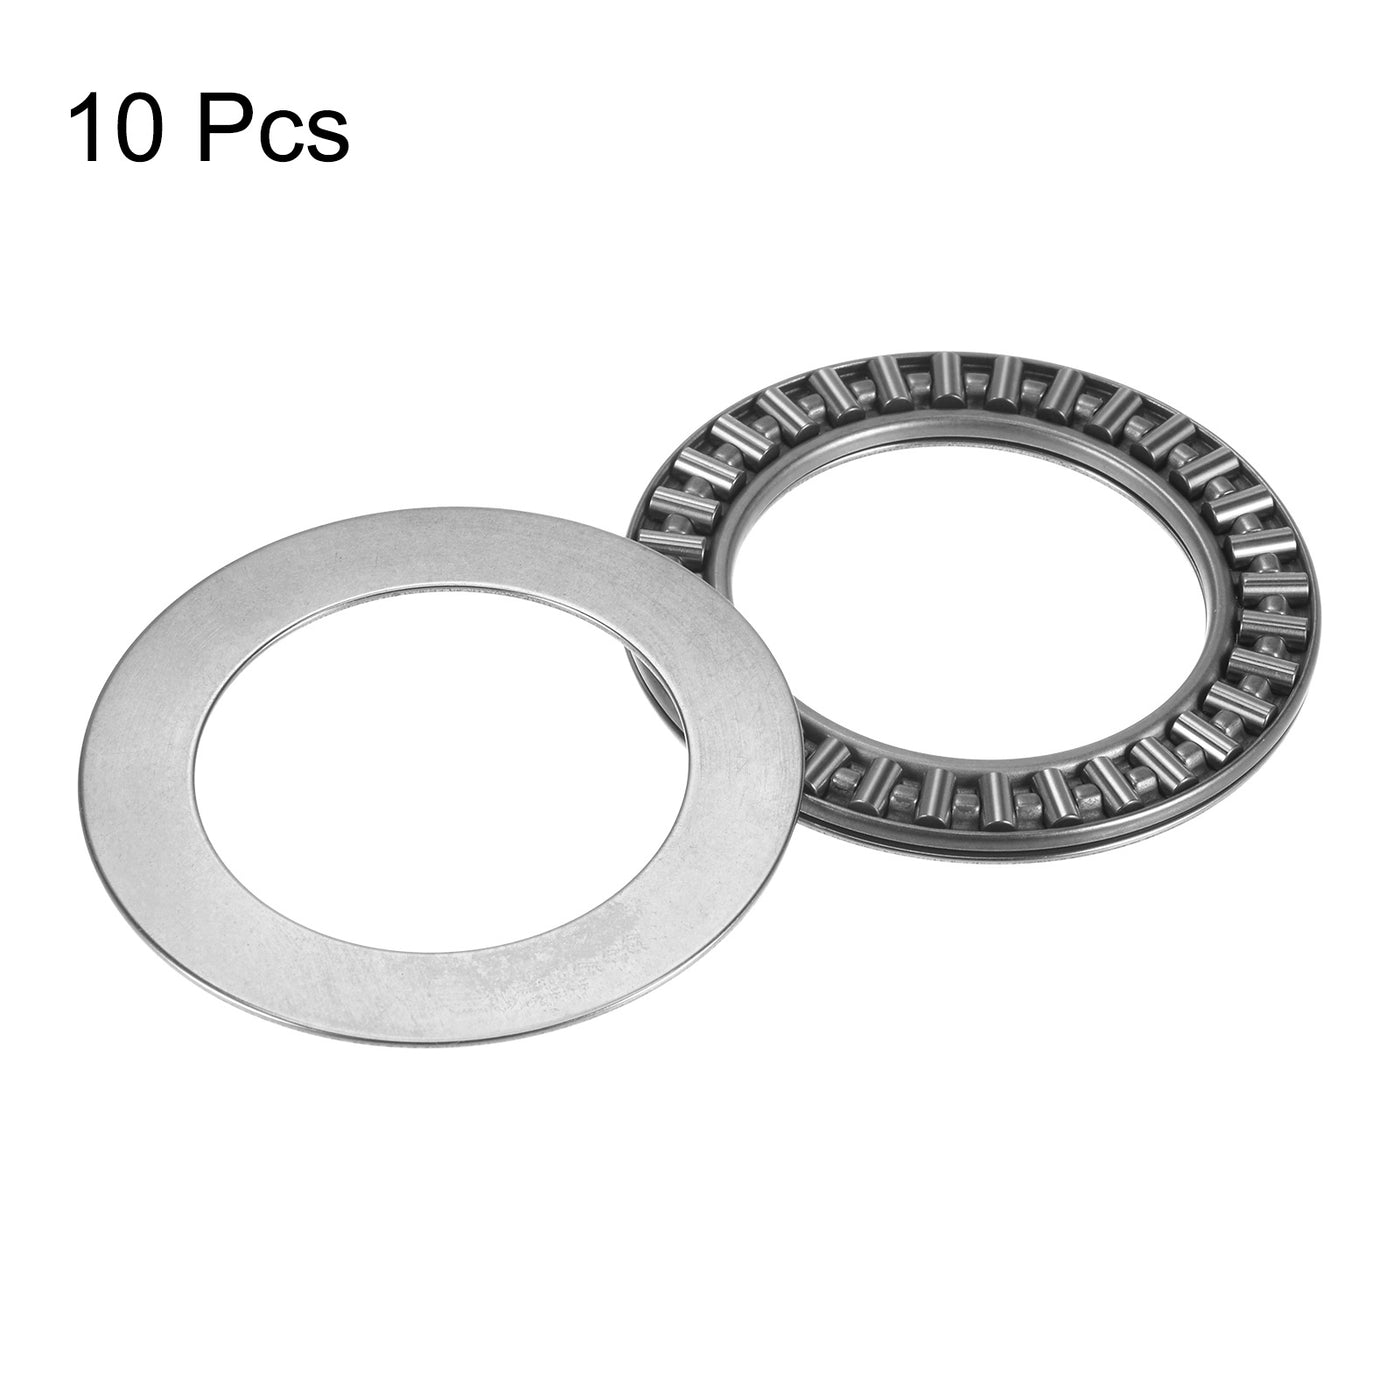 uxcell Uxcell AXK4060 Thrust Needle Roller Bearings 40x60x3mm with AS4060 Washers 10pcs